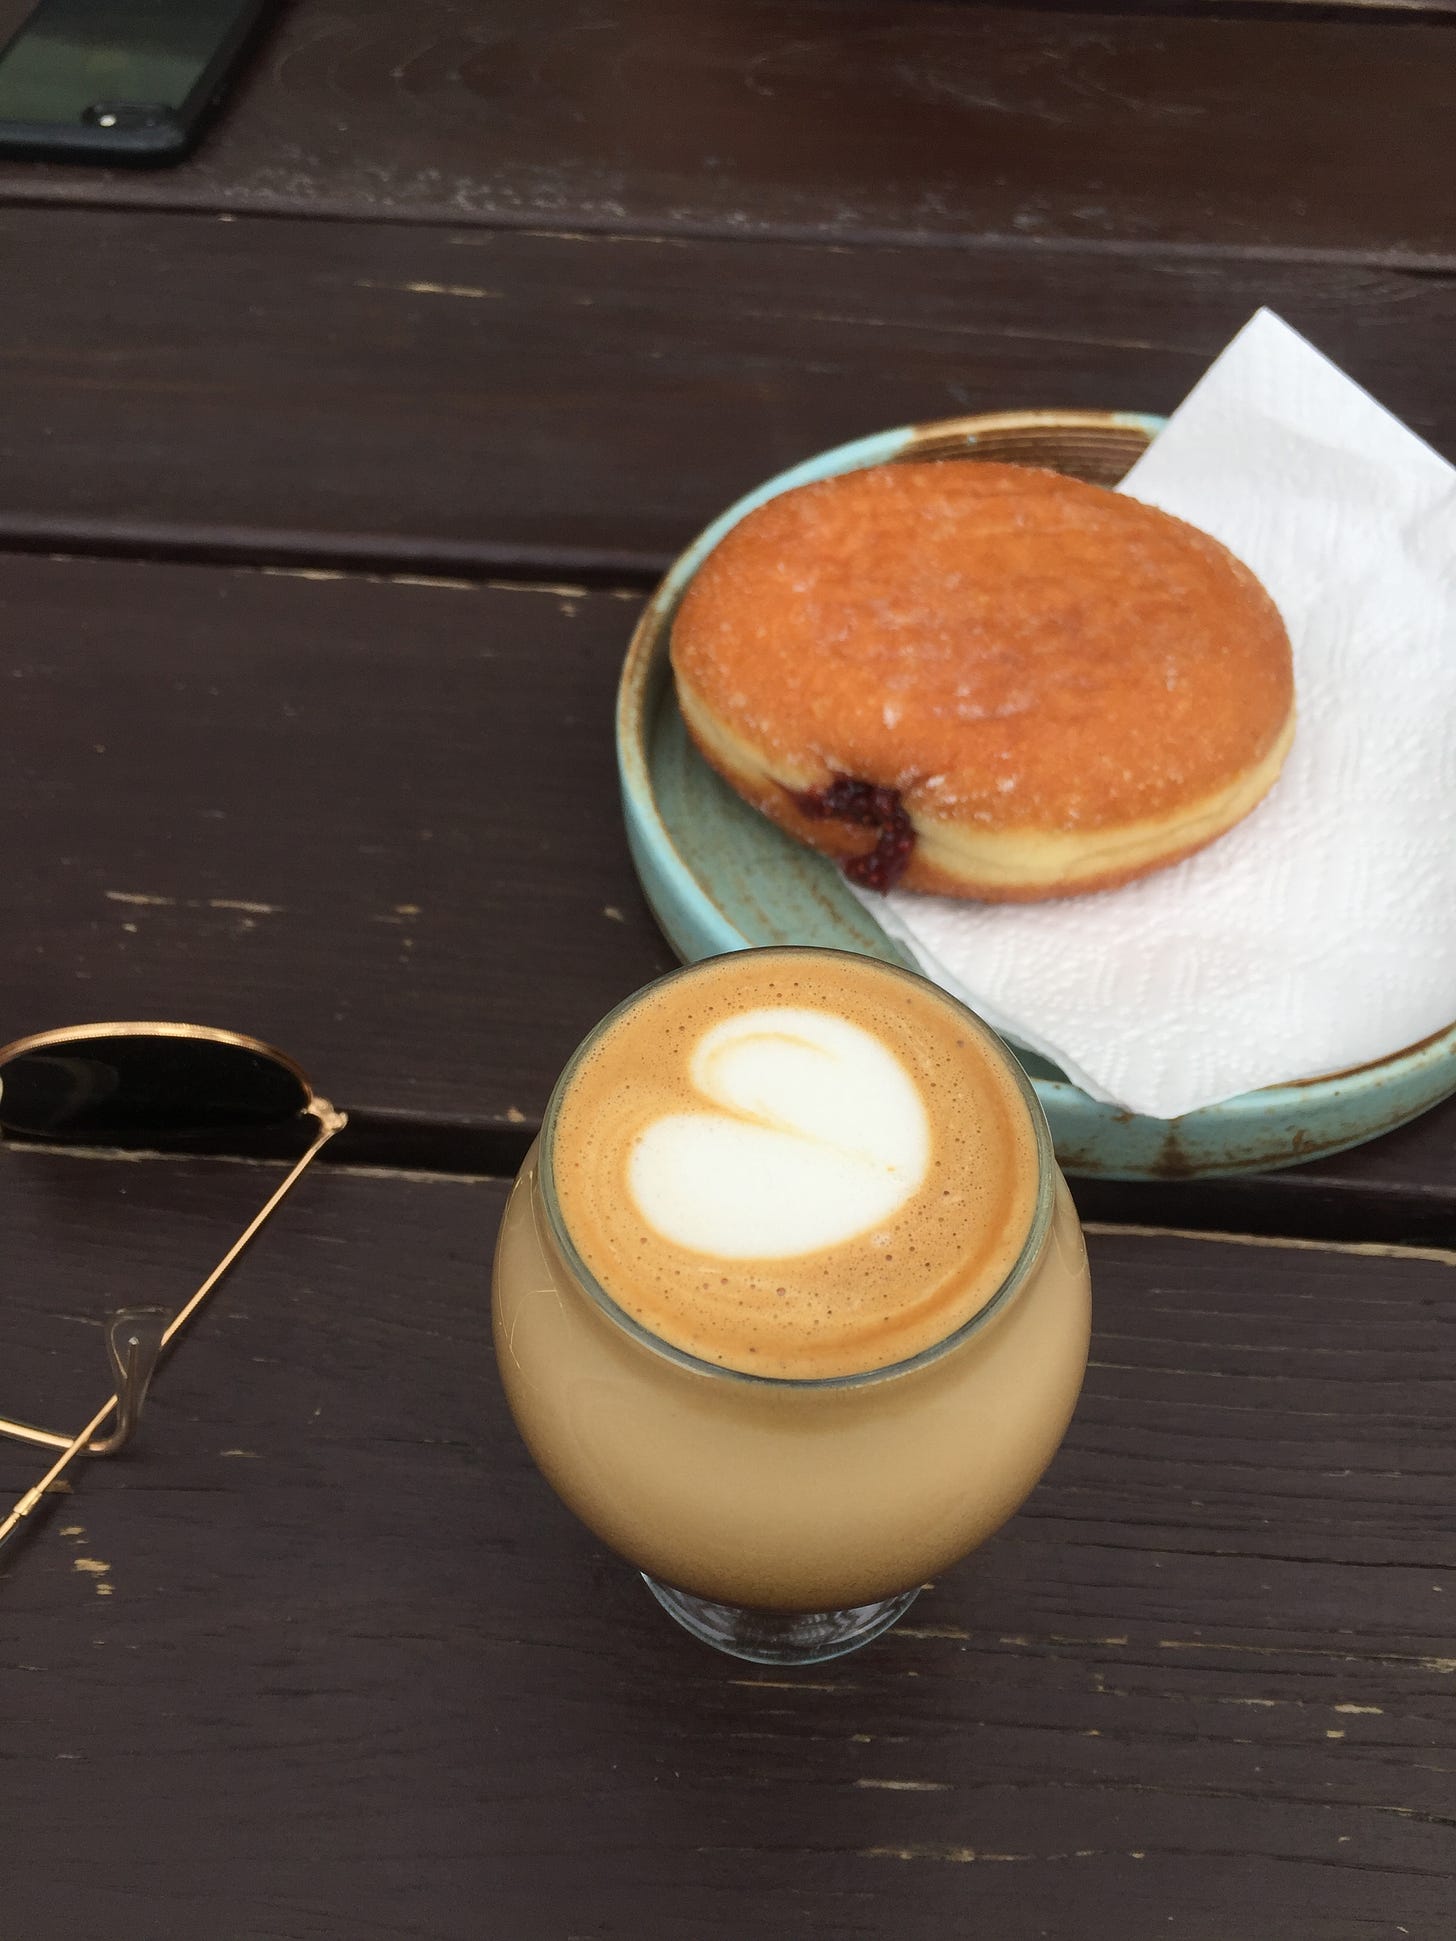 A small tulip glass with a cortado in it and heart-shaped art in the foam on top. Behind the glass is a pale blue stoneware plate with a jelly donut on it. Just visible at the side of the frame are a pair of sunglasses with gold rims.